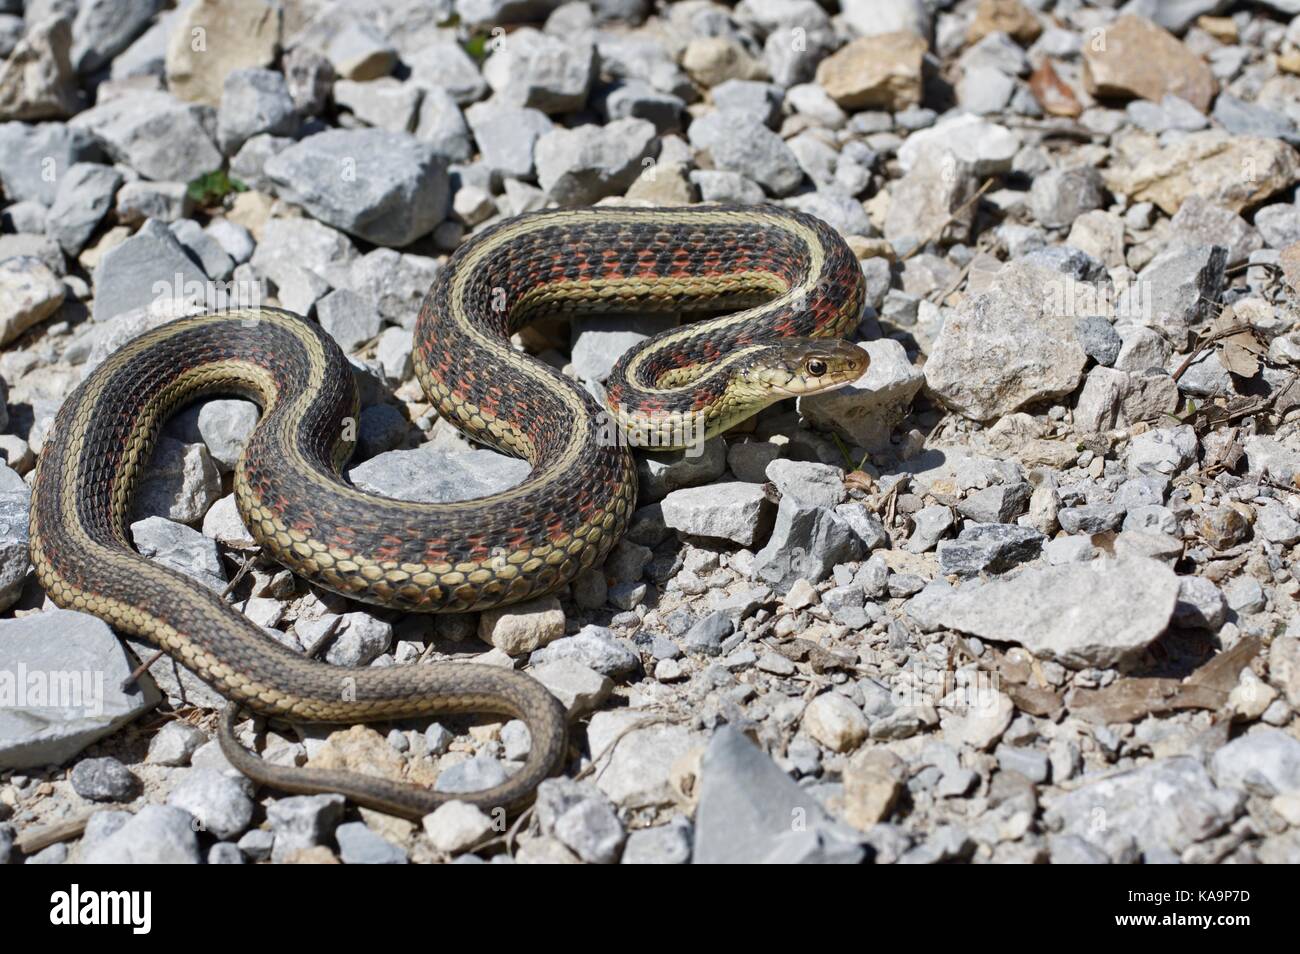 A Red-sided Gartersnake (Thamnophis sirtalis parietalis) on a gravel road in Benton County, Iowa, USA Stock Photo